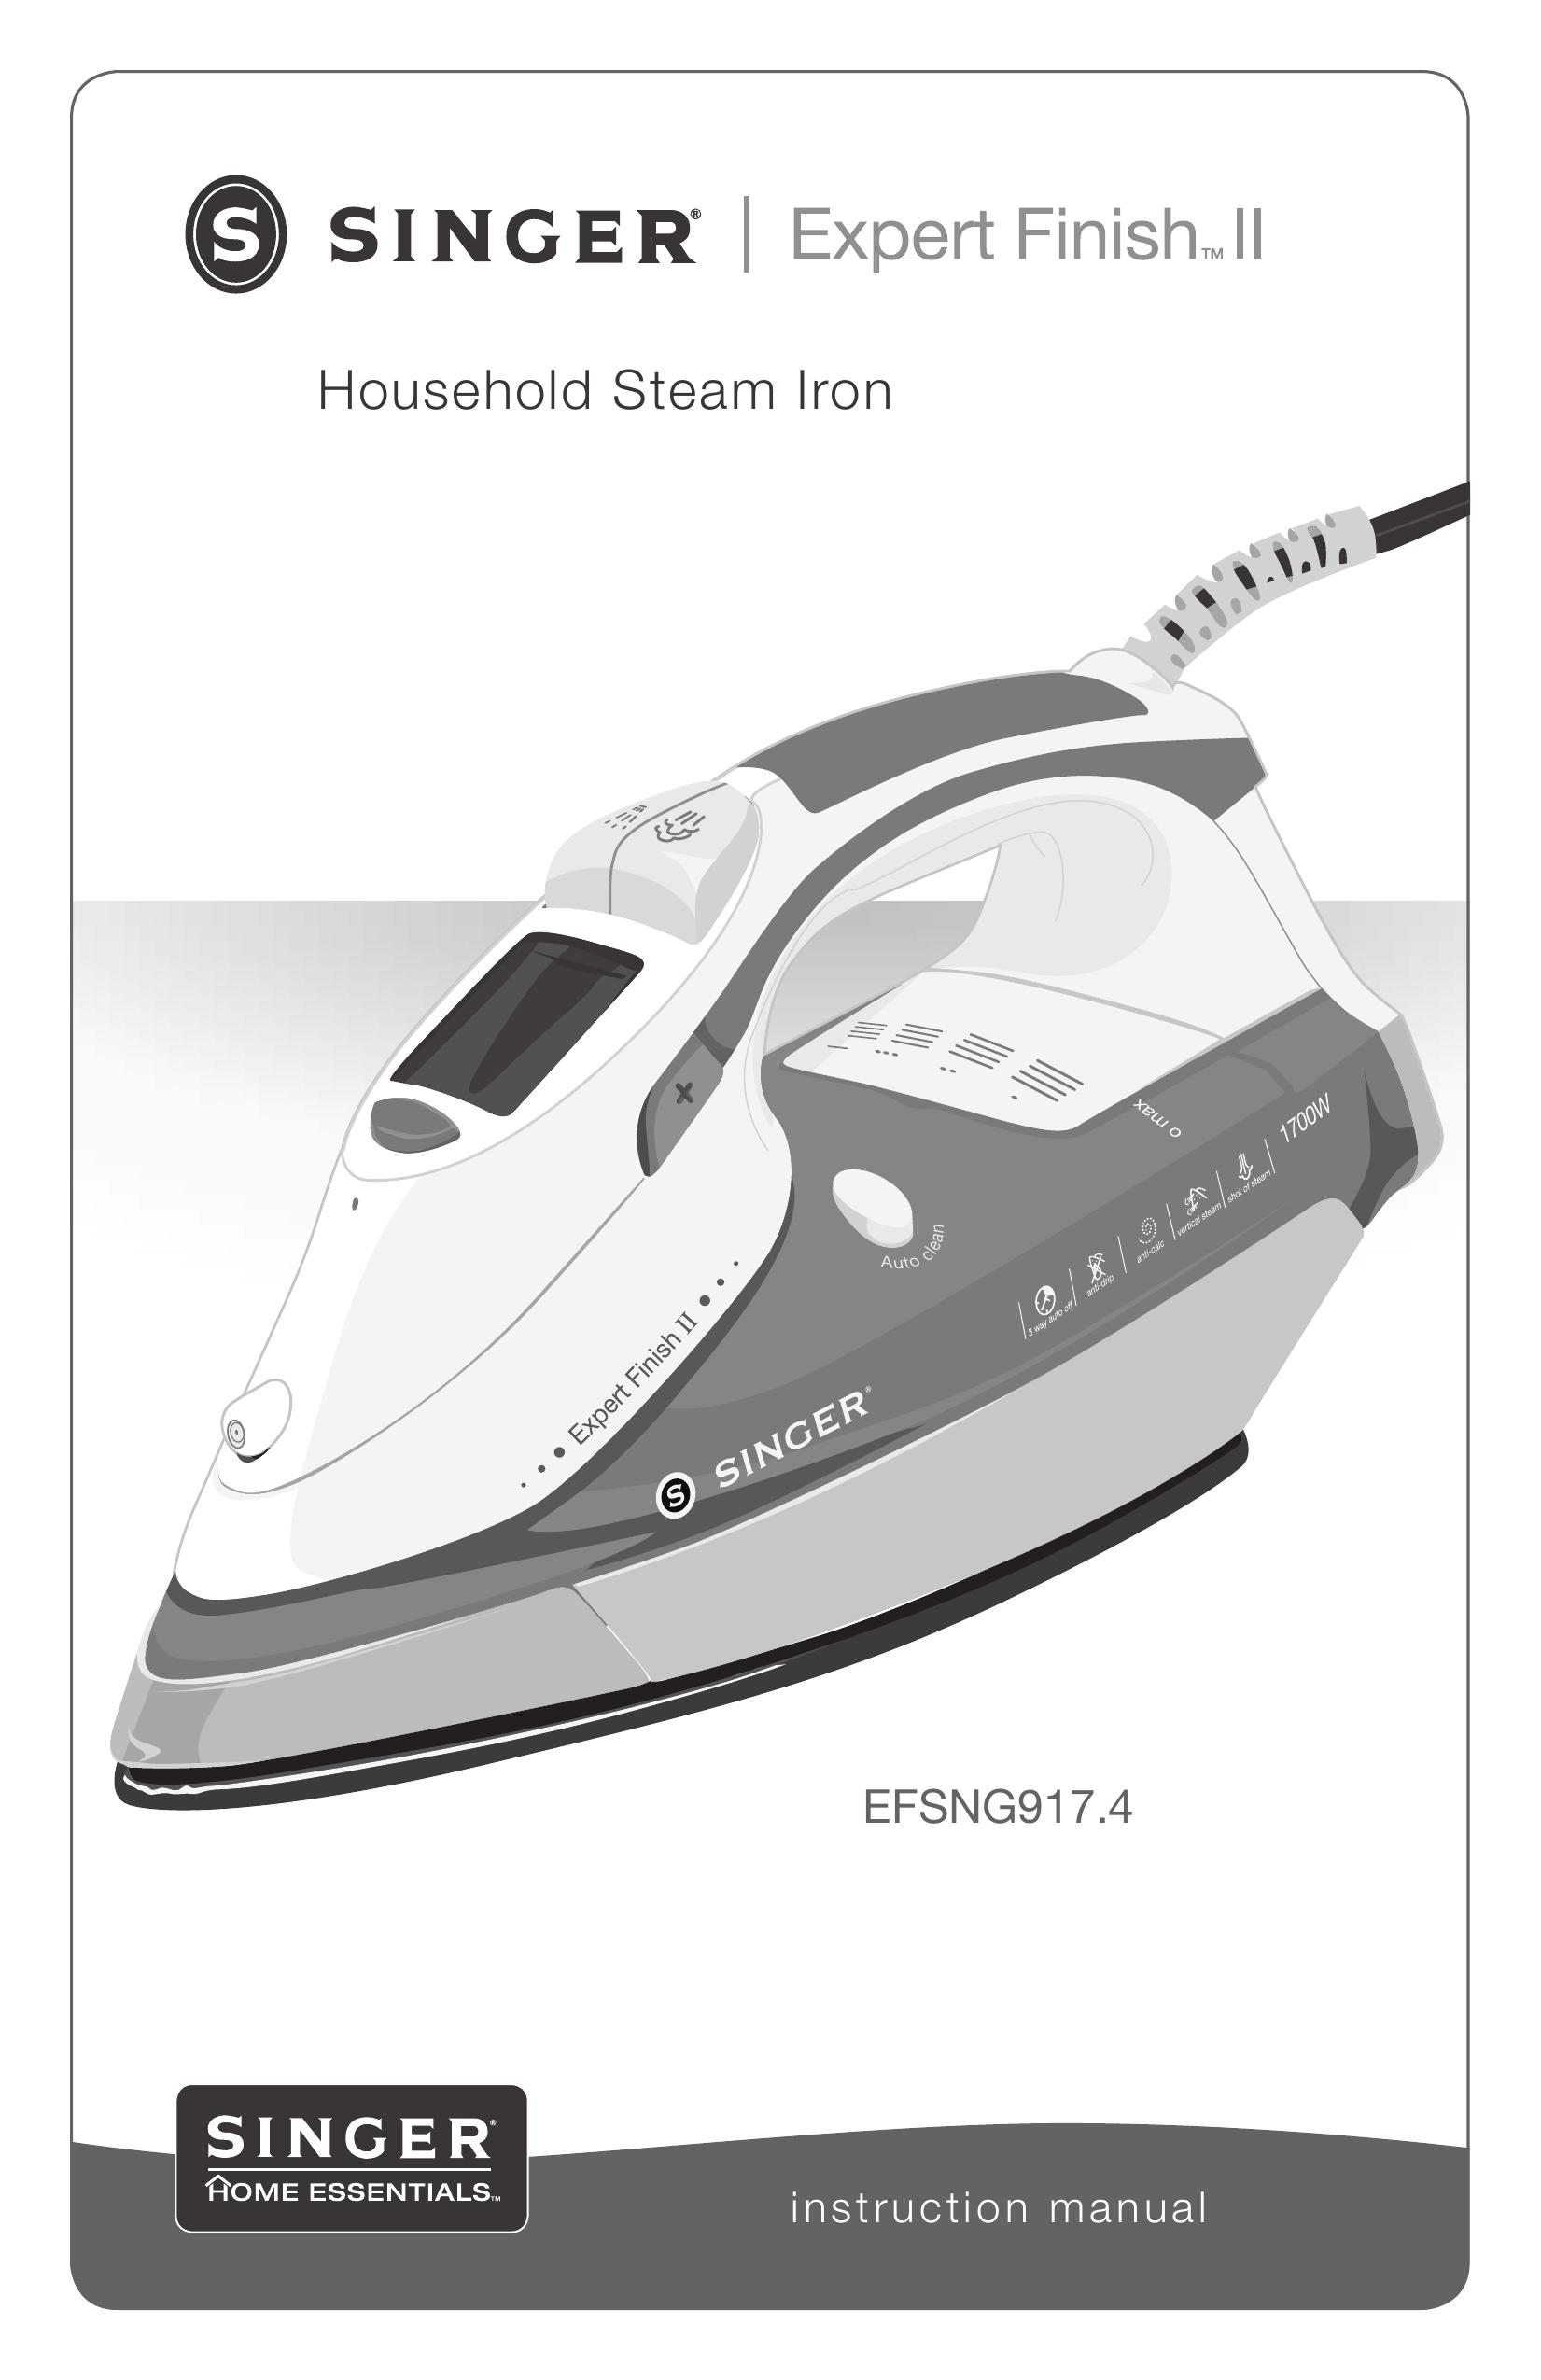 Singer EFSNG917 Iron User Manual (Page 1)